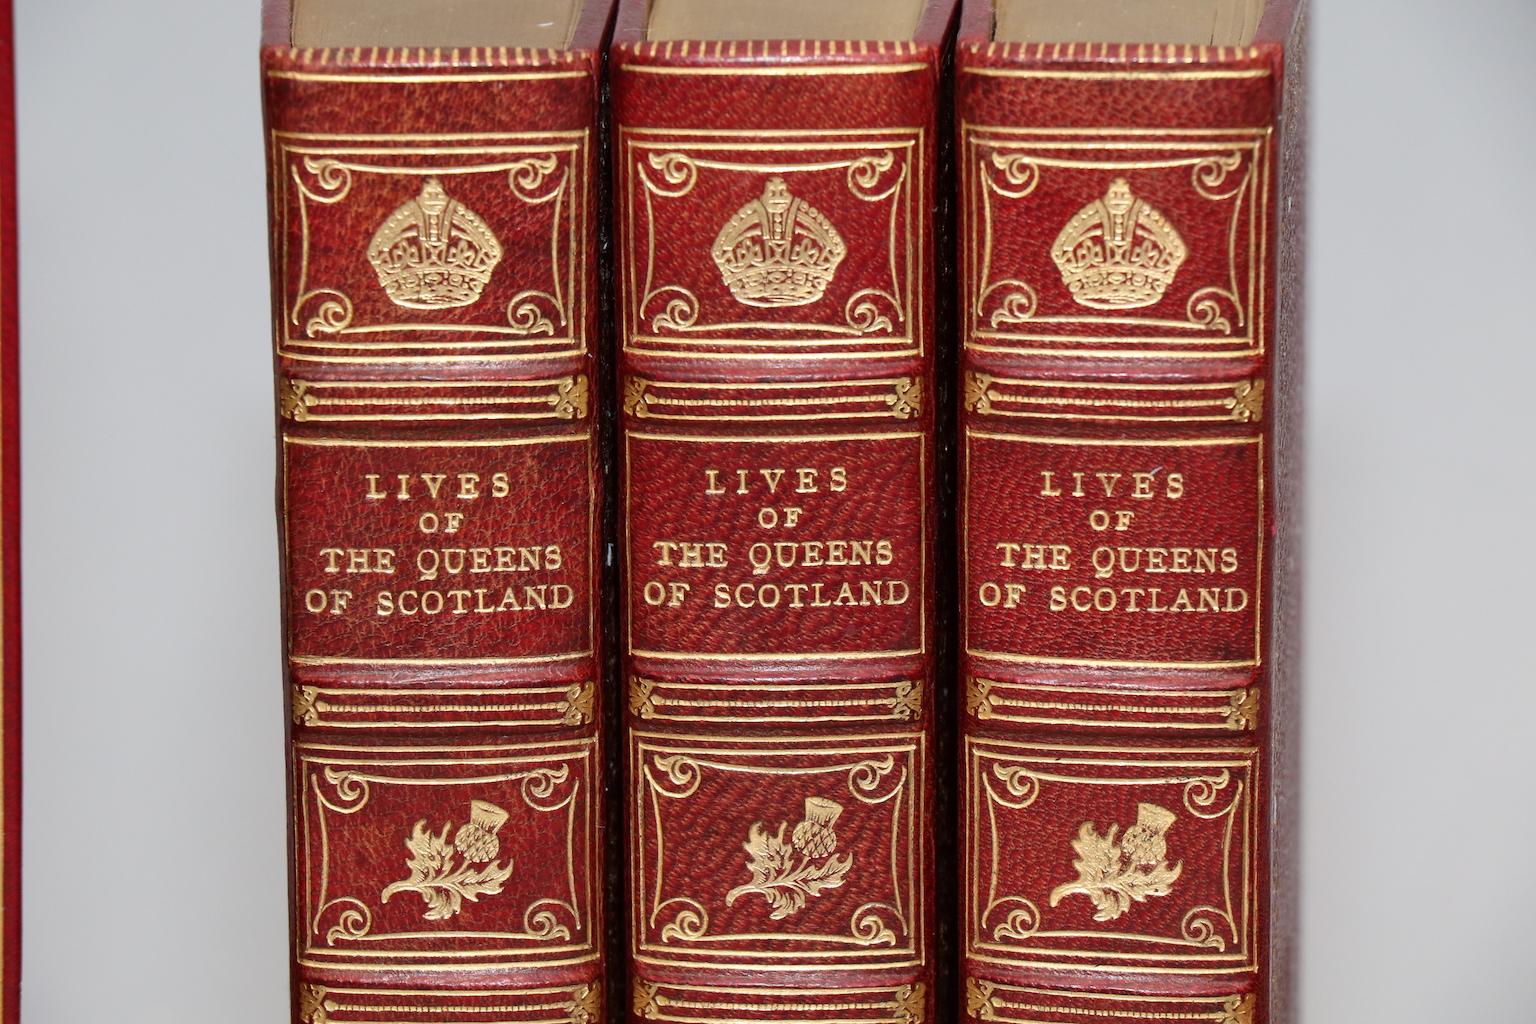 Leatherbound. 8 volumes. Bound in full red morocco by Bayntun with all edges gilt, raised bands, and gilt tooling on covers & spines. Illustrated. Very good. Published in Edinburgh & London by William Blackwood & Sons in 1850.



           